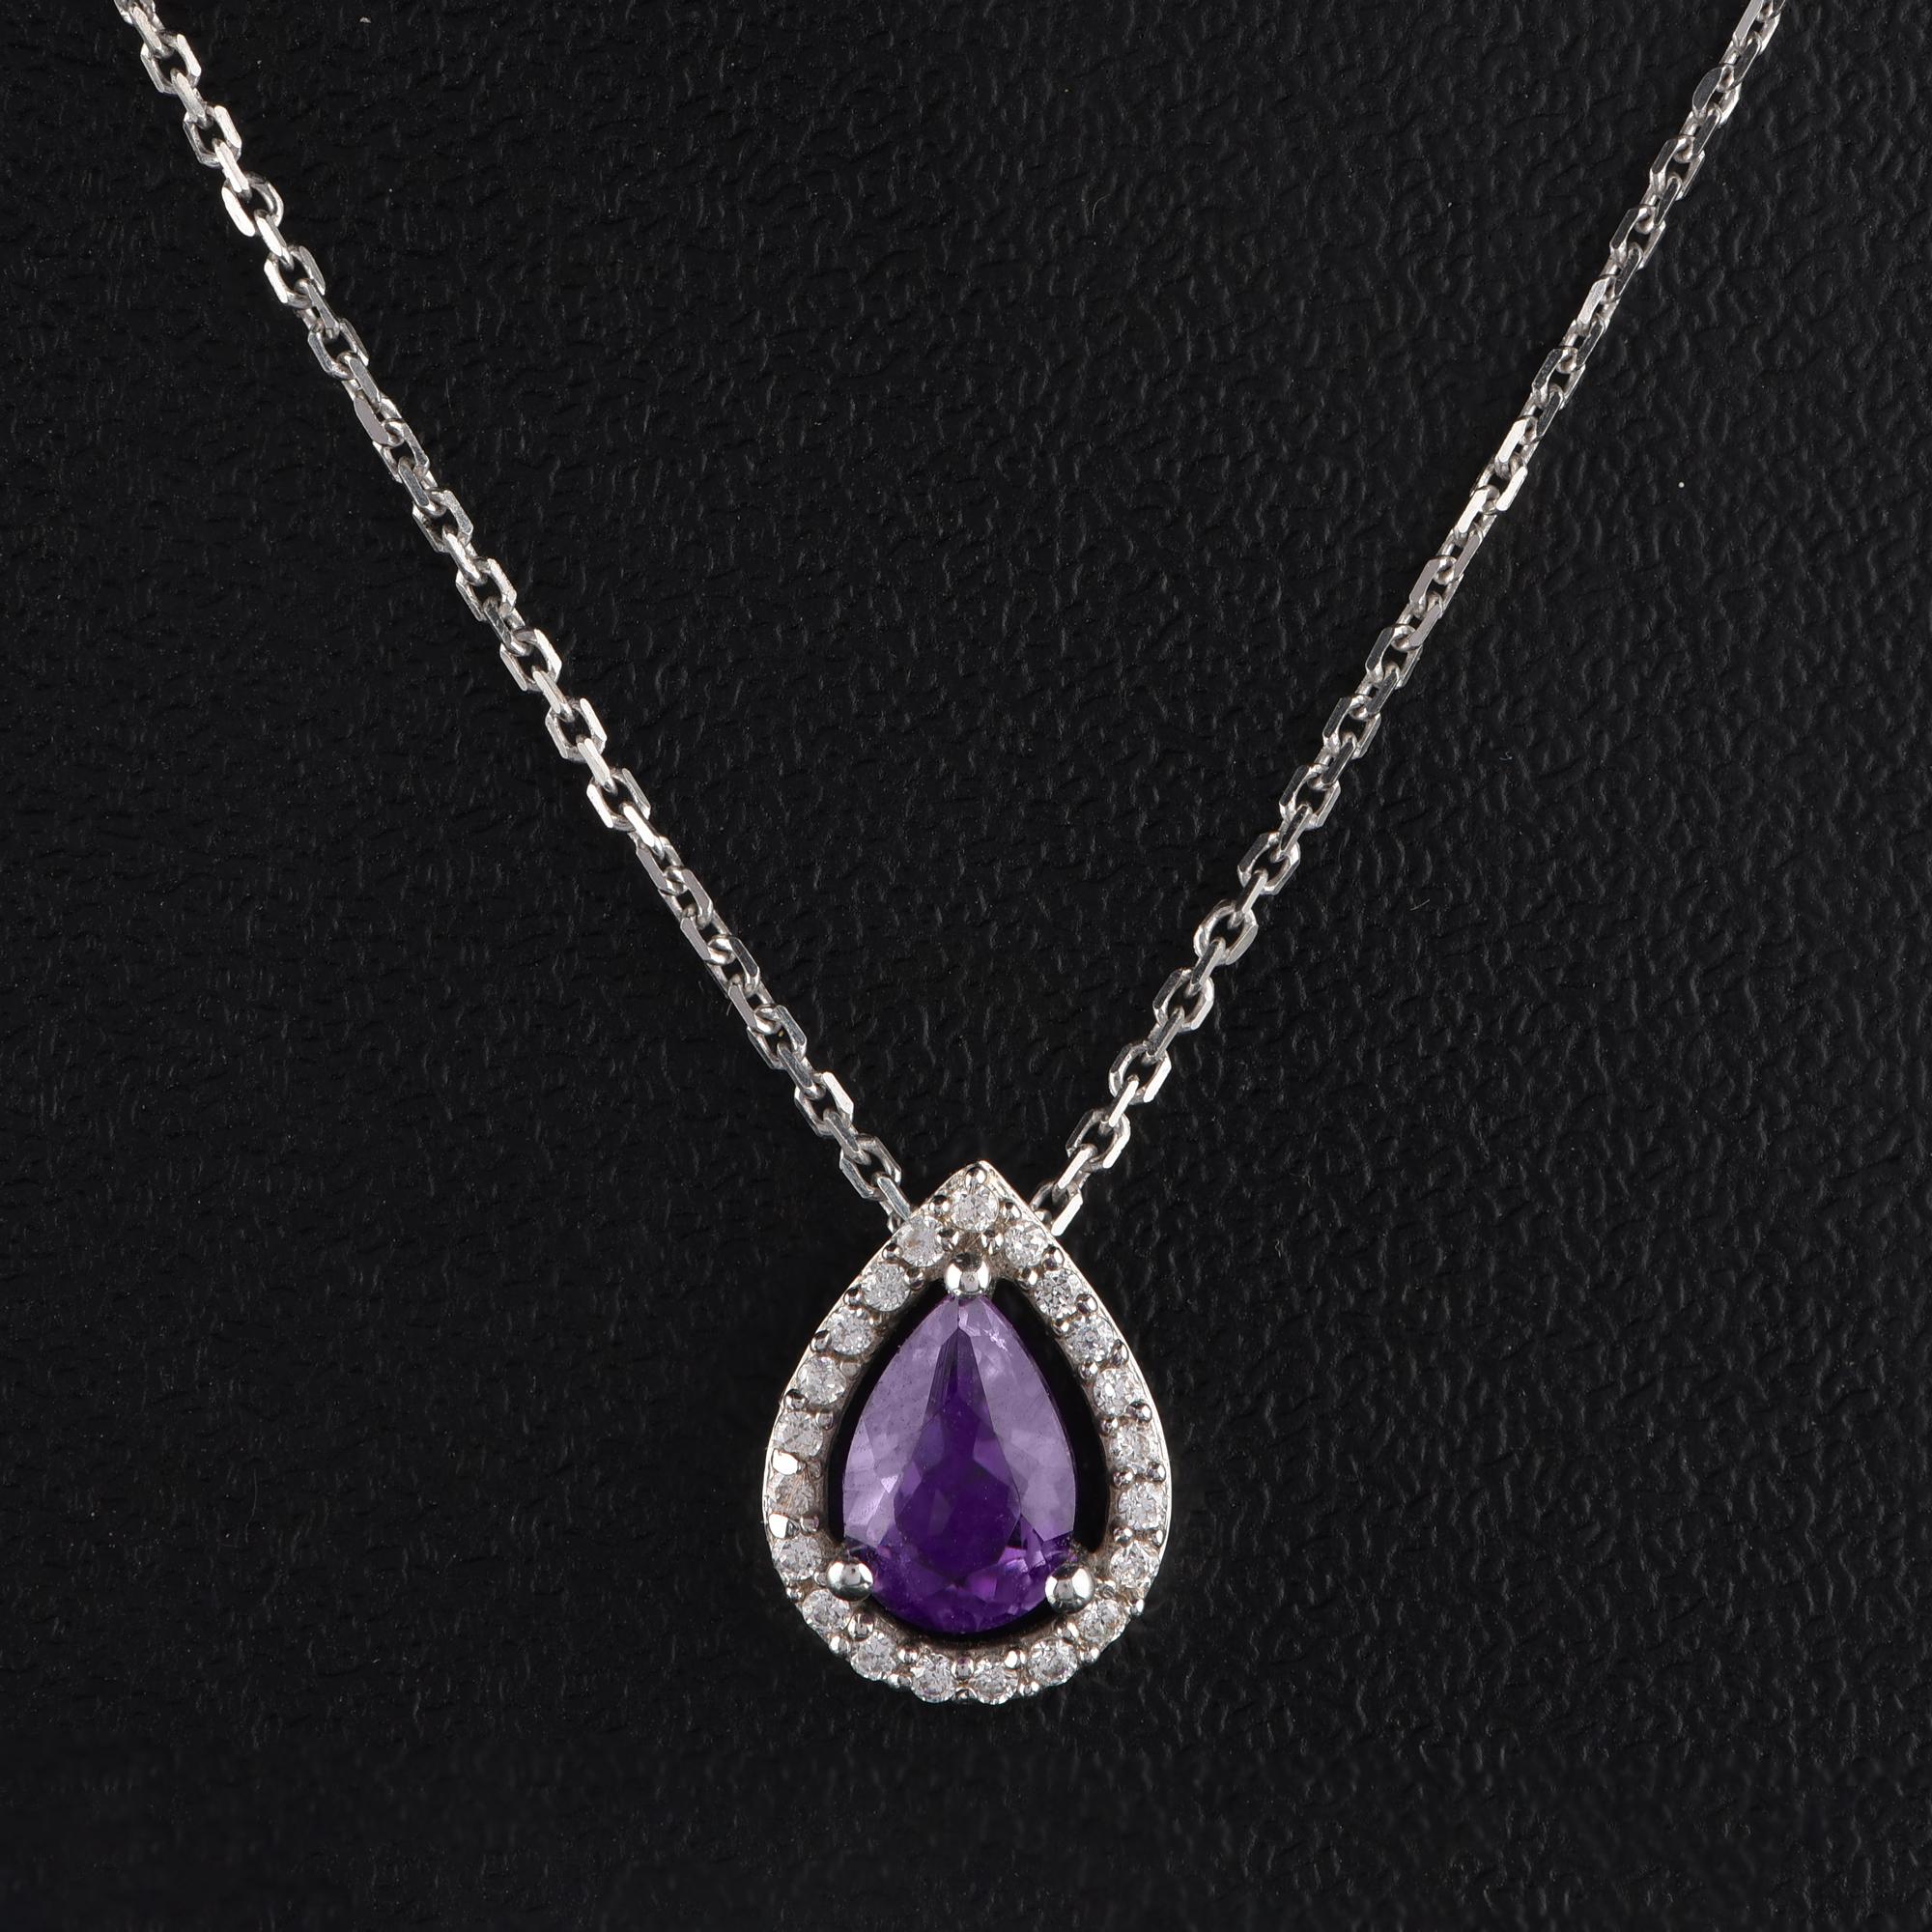 Elegant pendant necklace made to perfection in 18-karat white gold, studded beautifully with 21 brilliant-cut and one amethyst gemstone embellished in prong setting. The diamonds are graded H-I Color, I2 Clarity. The pendant comes along with an 18